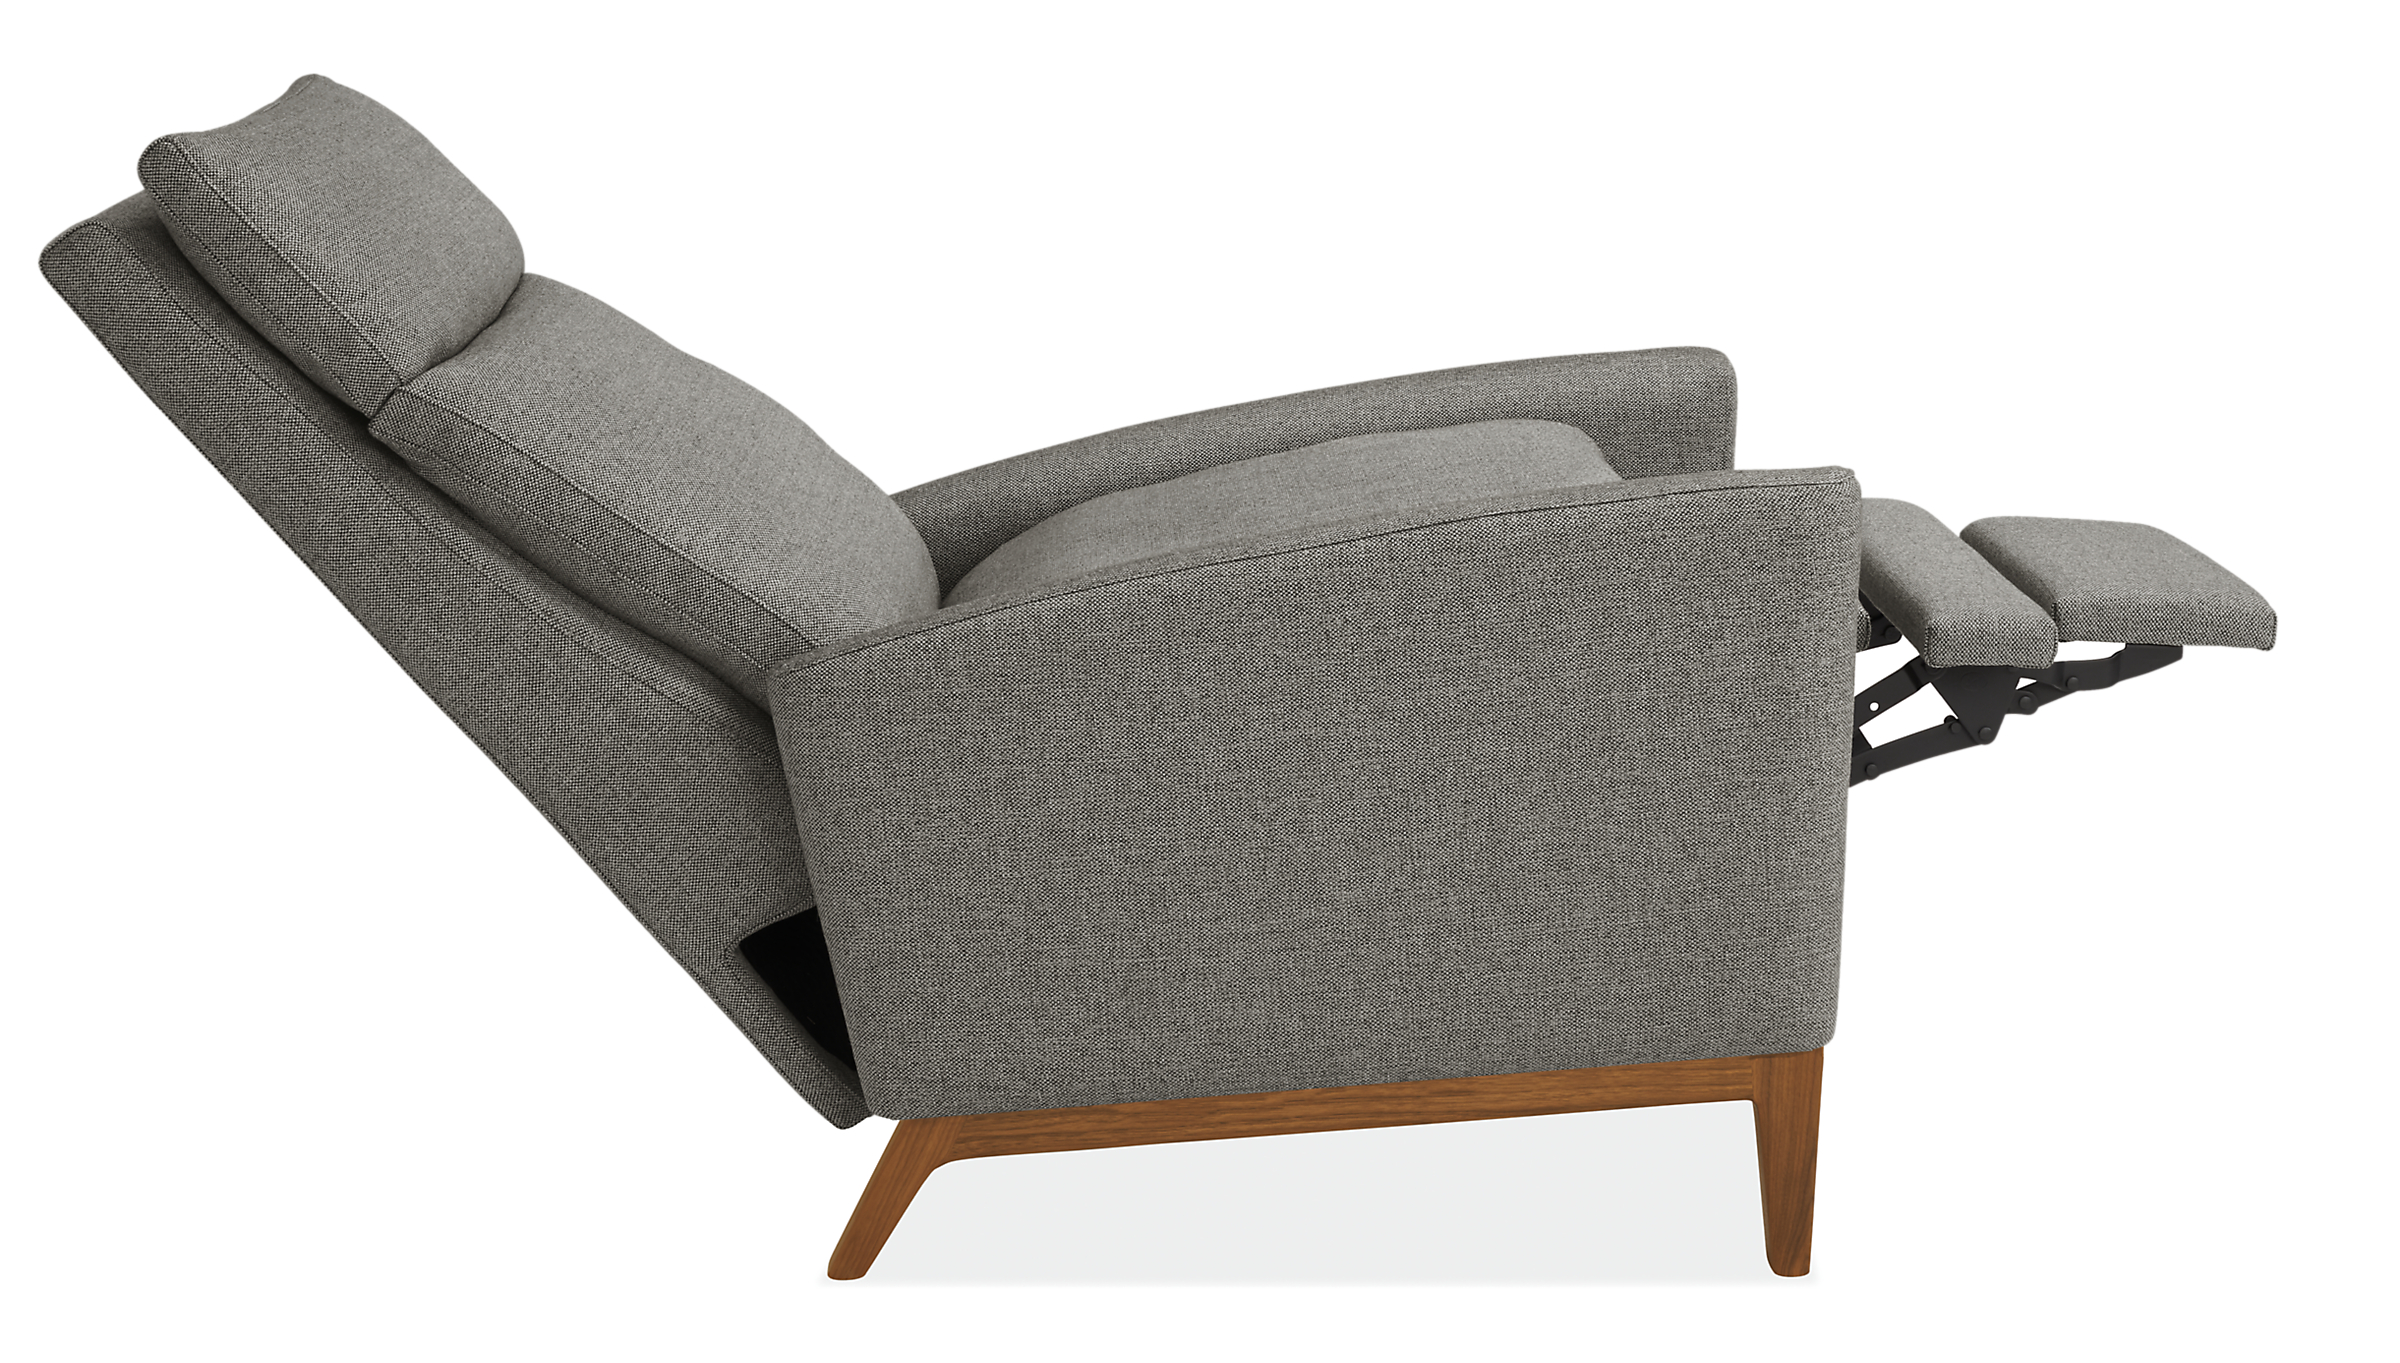 Open detail of Isaac Select Recliner Curved-Arm in Sumner Fabric with Wood Base.